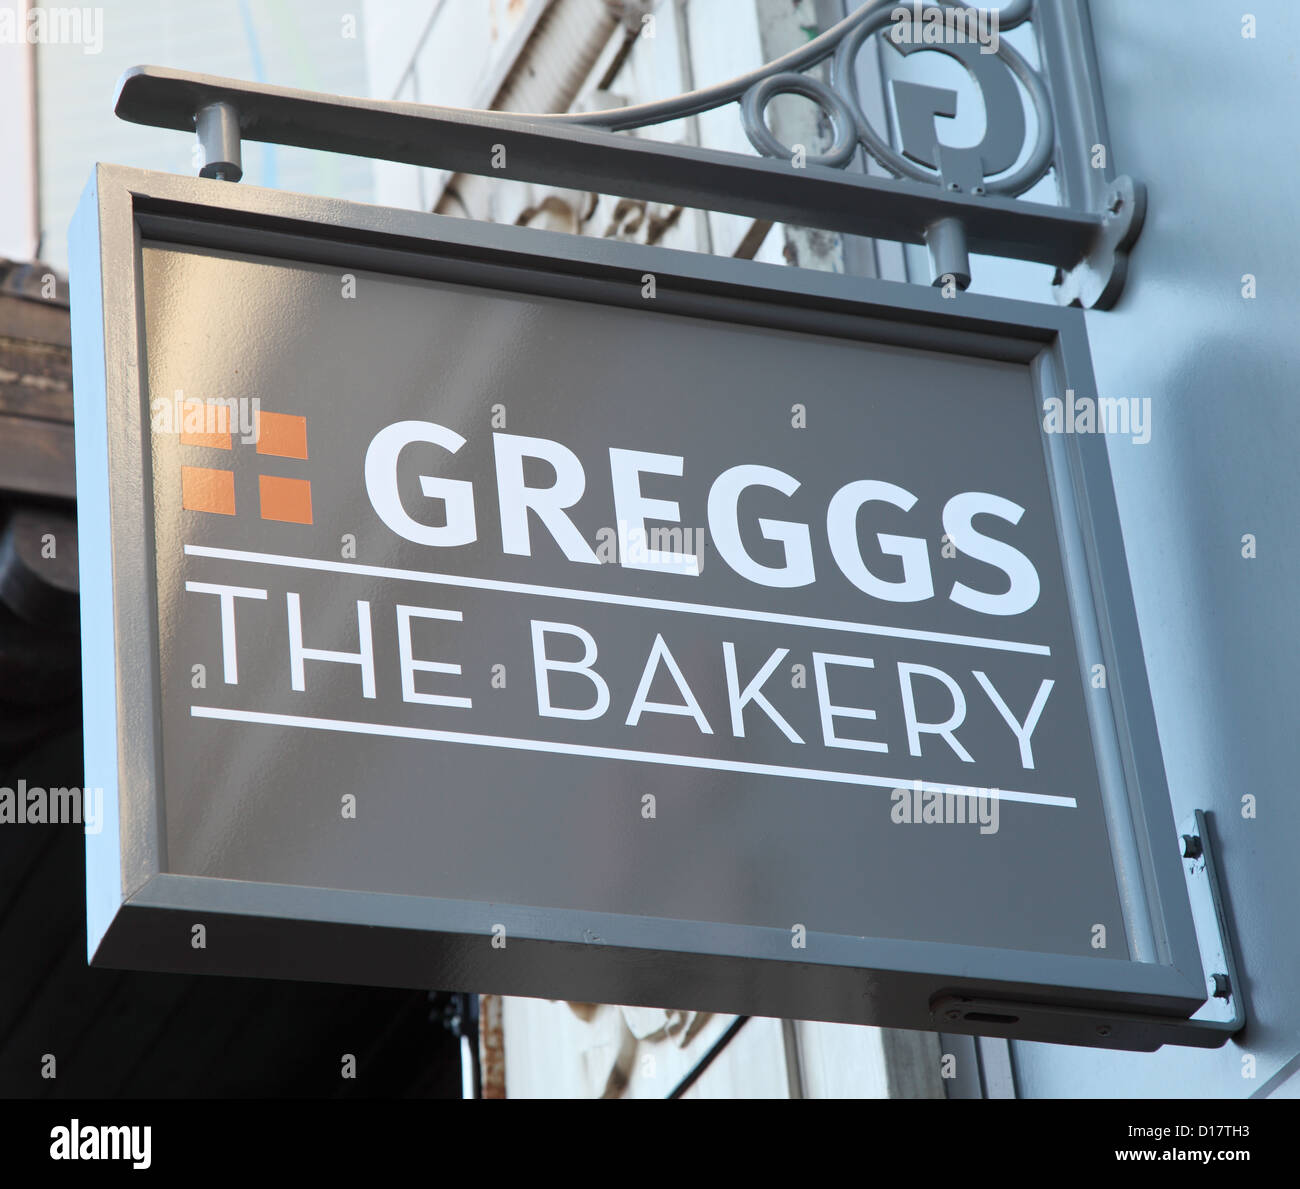 Greggs the Bakers Bakery sign above shop  in Whitley Bay, north east England UK Stock Photo